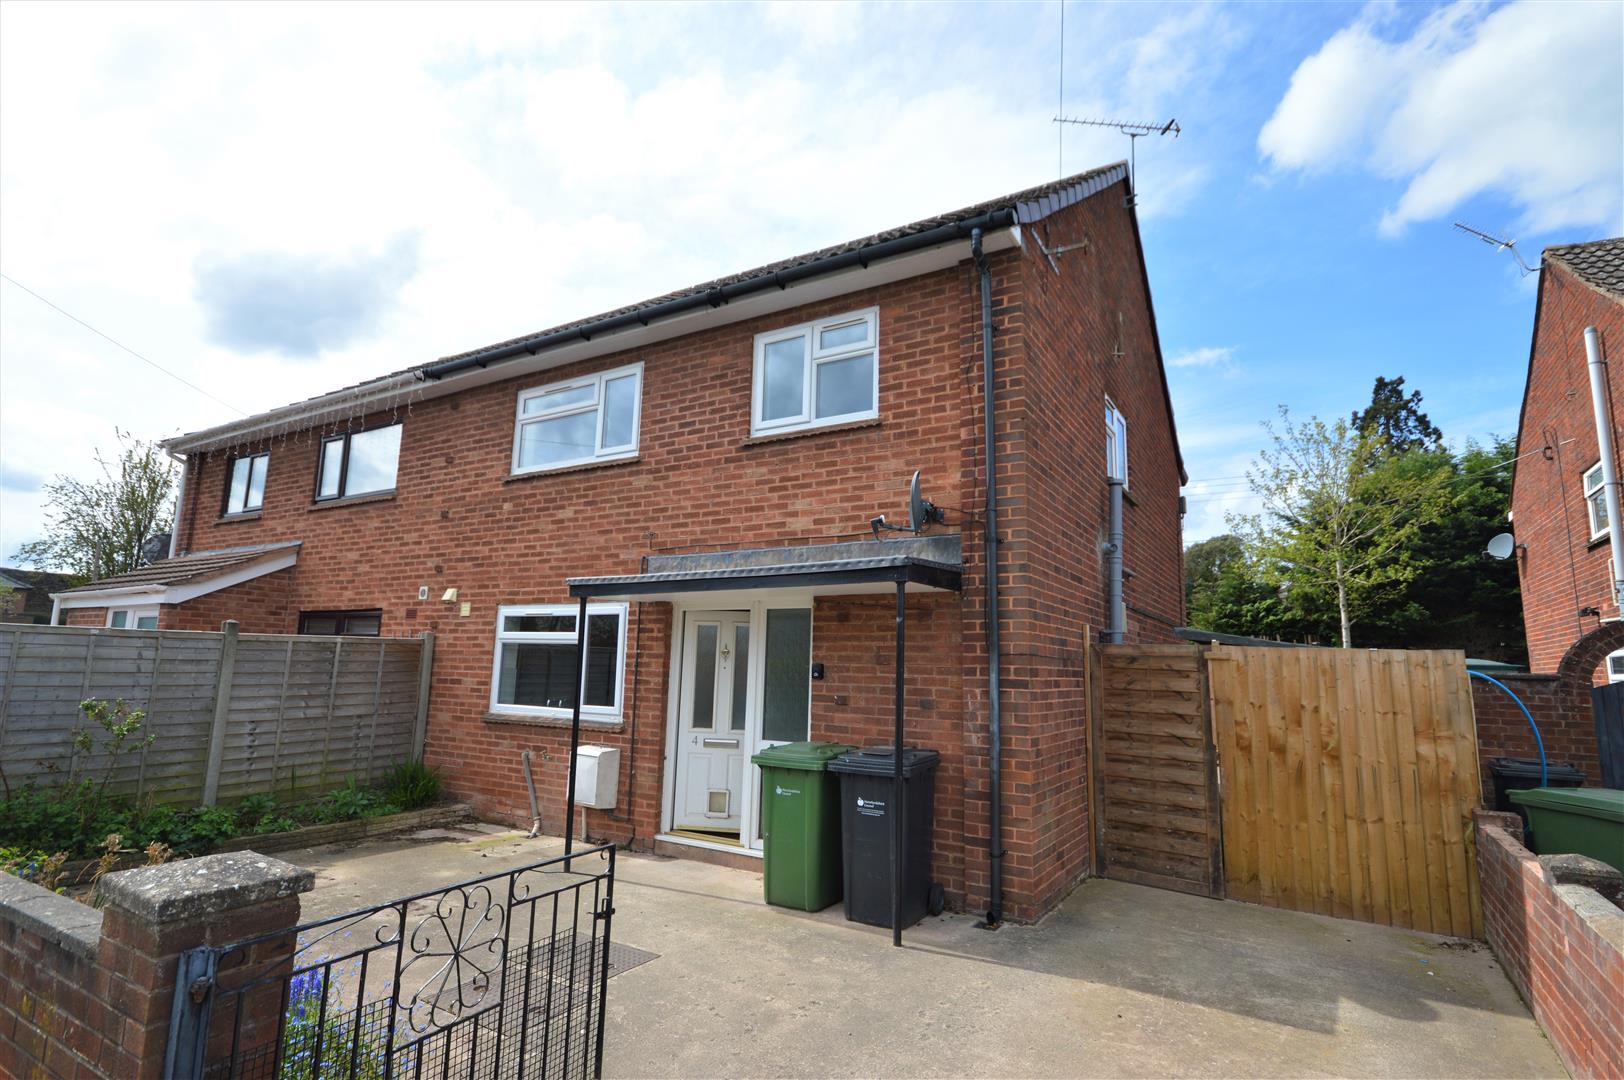 3 bed semi-detached for sale in Moreton-On-Lugg - Property Image 1